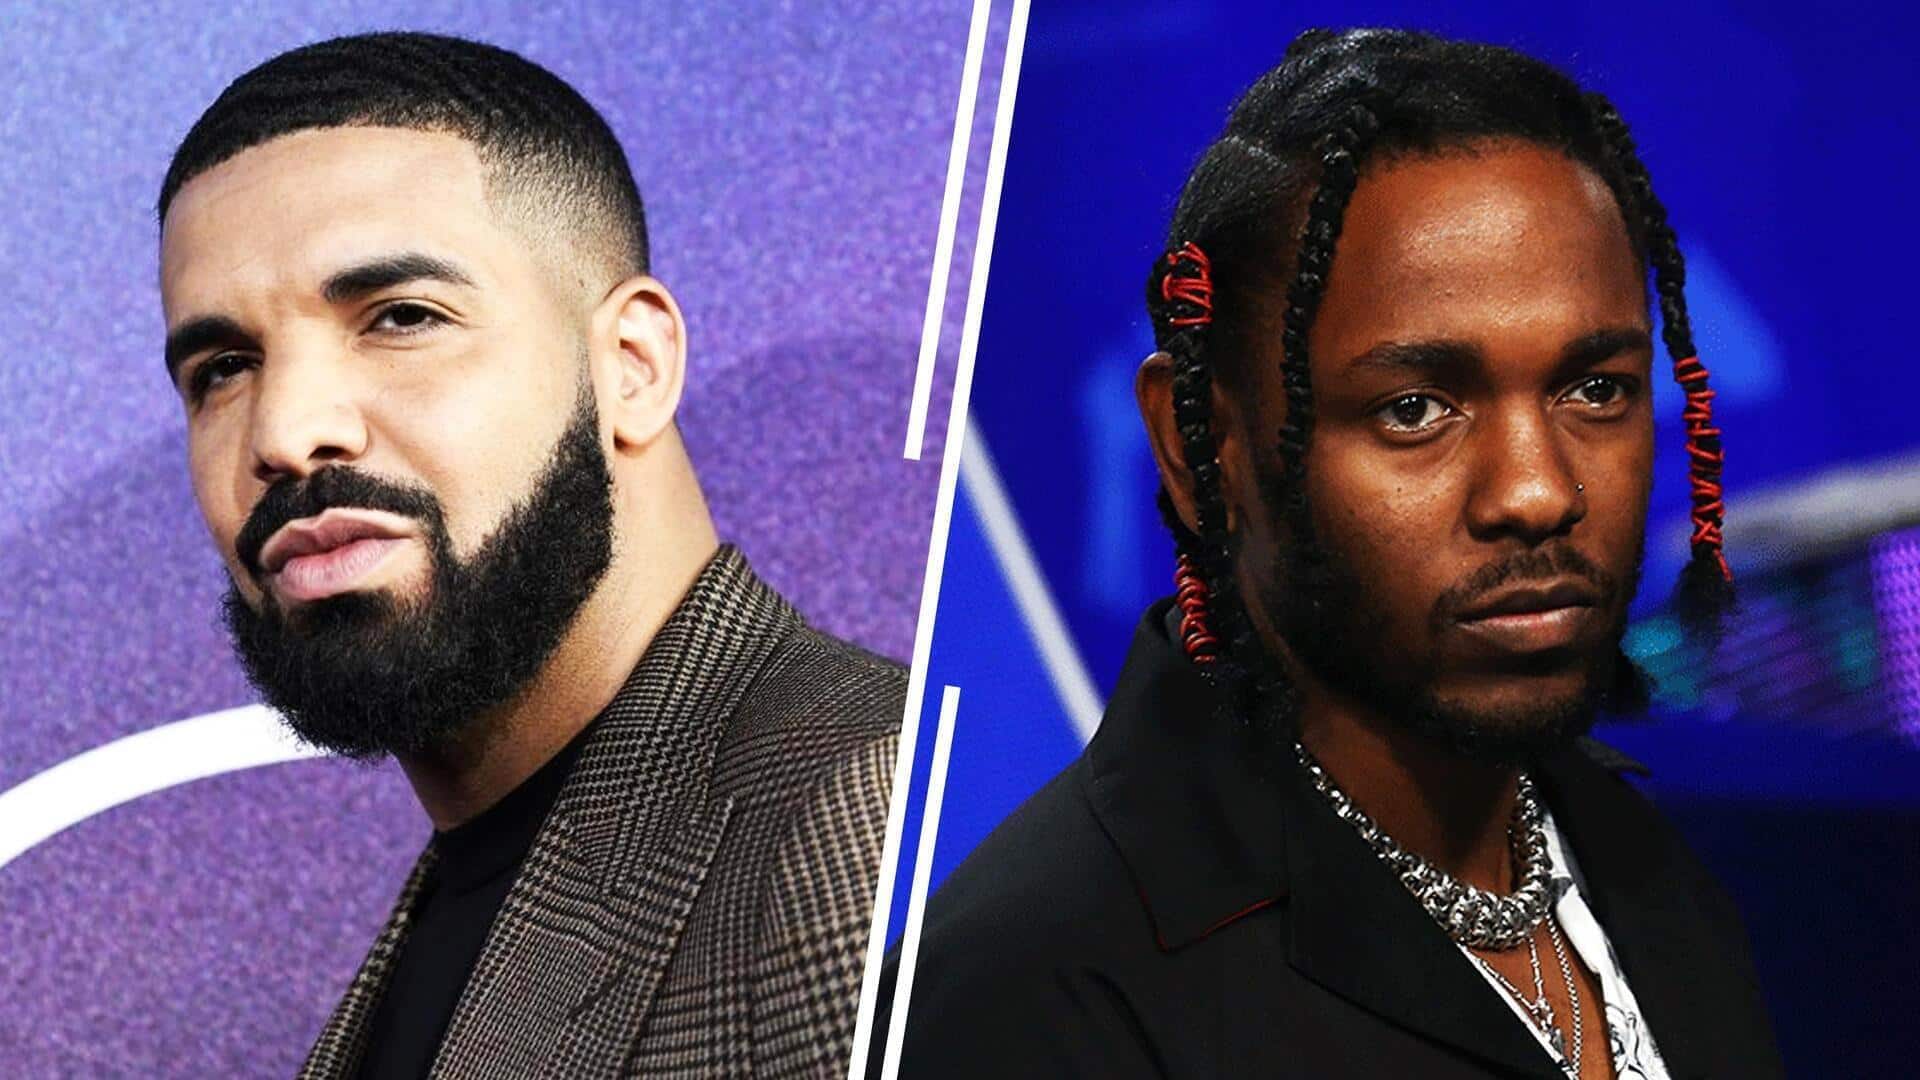 UMG takes a backseat in Drake and Kendrick Lamar's feud